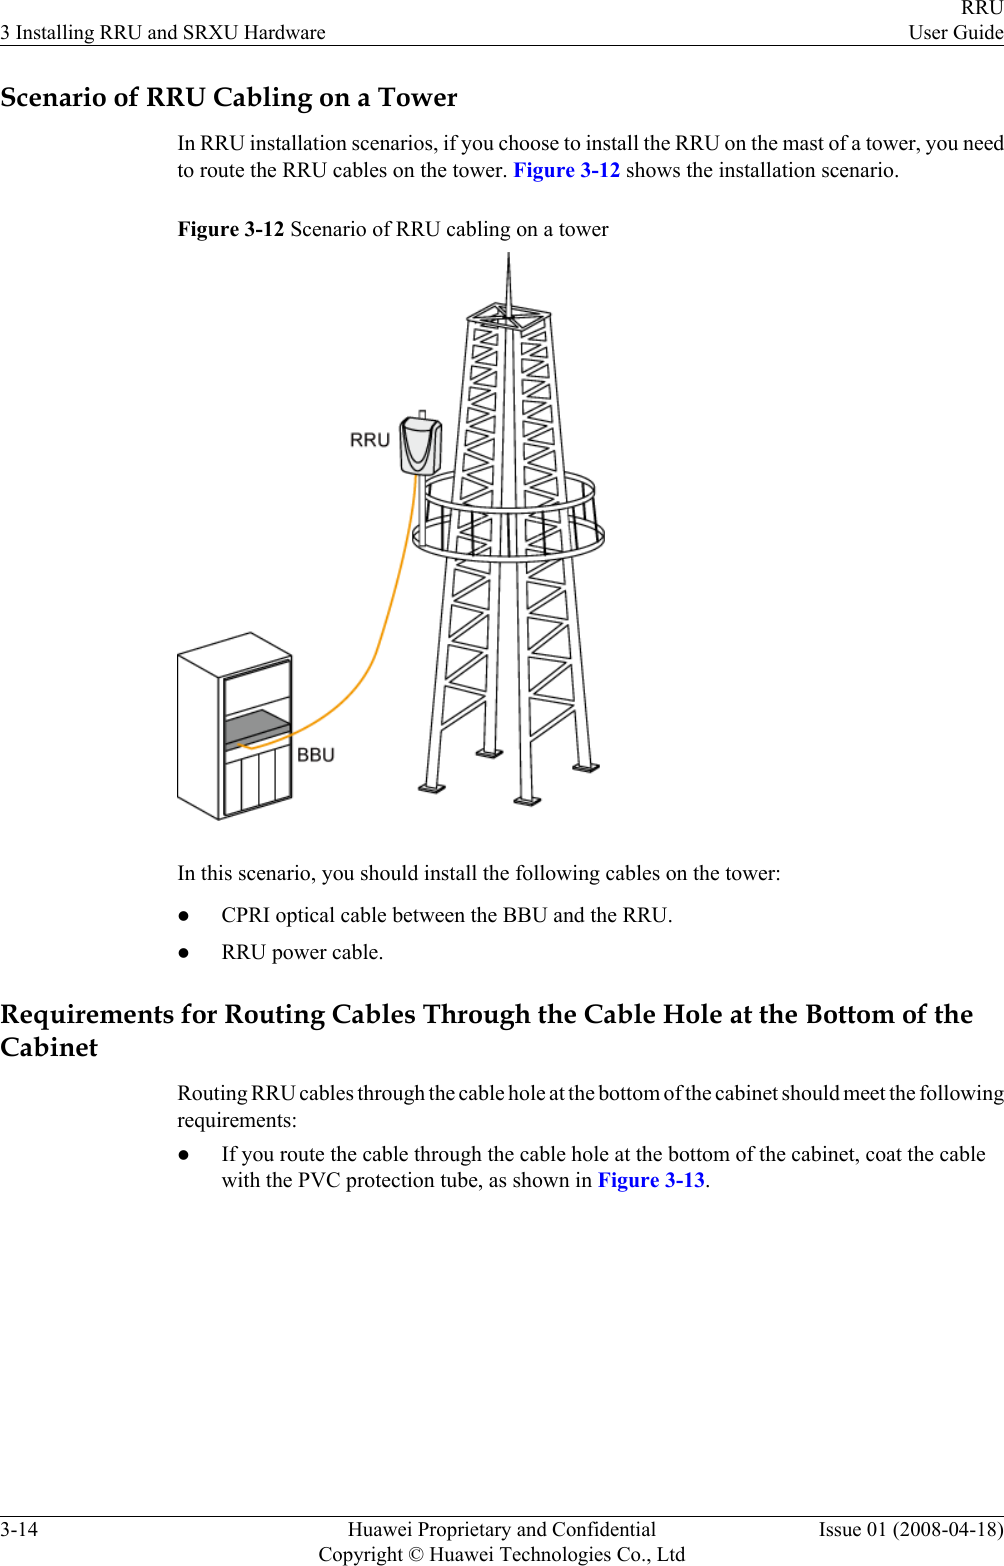 Scenario of RRU Cabling on a TowerIn RRU installation scenarios, if you choose to install the RRU on the mast of a tower, you needto route the RRU cables on the tower. Figure 3-12 shows the installation scenario.Figure 3-12 Scenario of RRU cabling on a towerIn this scenario, you should install the following cables on the tower:lCPRI optical cable between the BBU and the RRU.lRRU power cable.Requirements for Routing Cables Through the Cable Hole at the Bottom of theCabinetRouting RRU cables through the cable hole at the bottom of the cabinet should meet the followingrequirements:lIf you route the cable through the cable hole at the bottom of the cabinet, coat the cablewith the PVC protection tube, as shown in Figure 3-13.3 Installing RRU and SRXU HardwareRRUUser Guide3-14 Huawei Proprietary and ConfidentialCopyright © Huawei Technologies Co., LtdIssue 01 (2008-04-18)